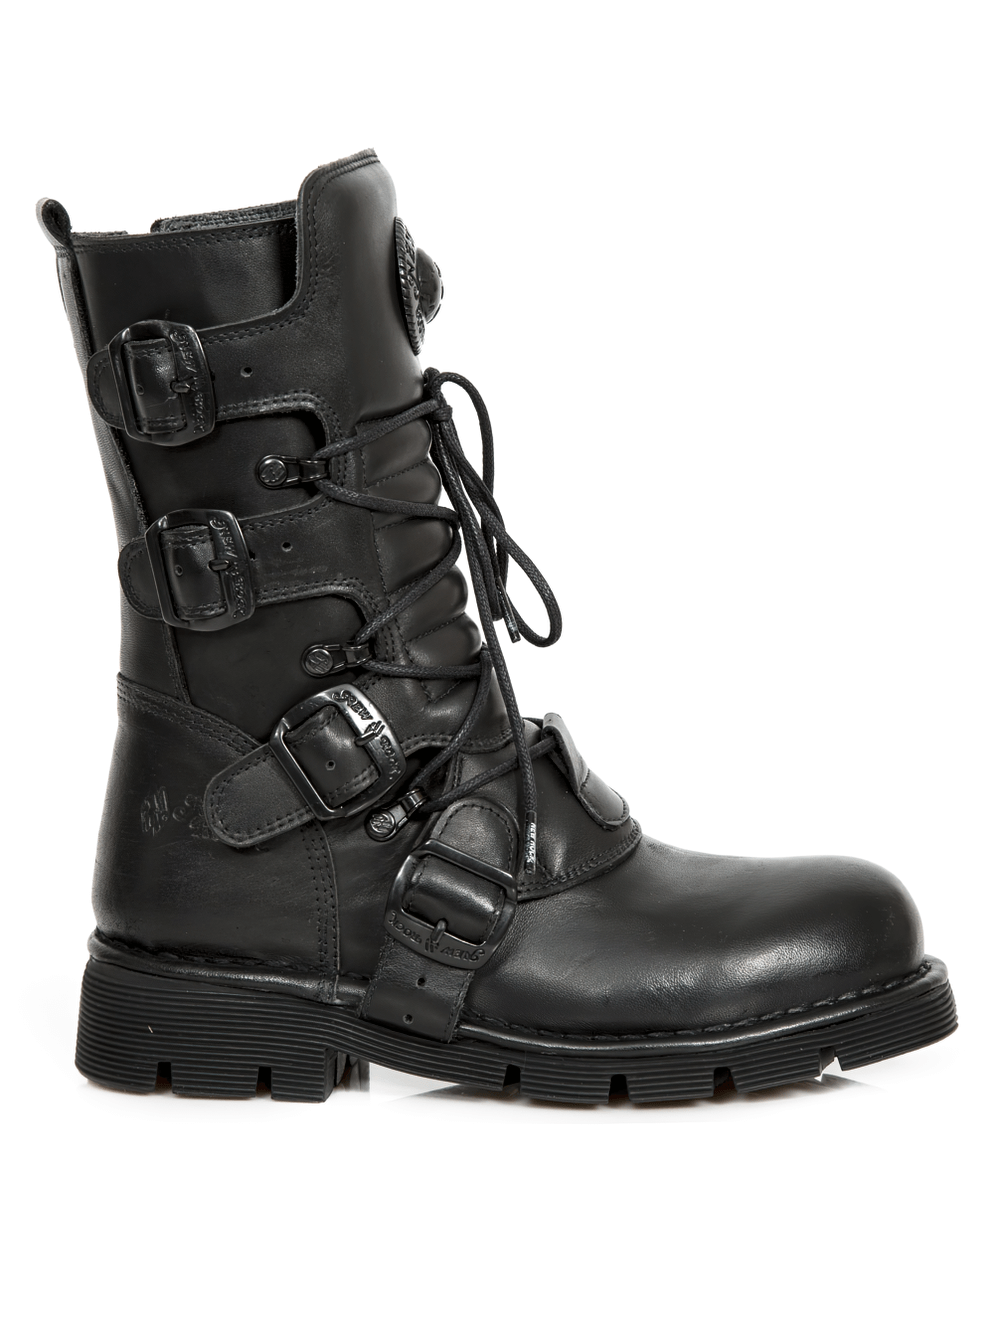 NEW ROCK Black Gothic Buckled Boots with Embossed Detail